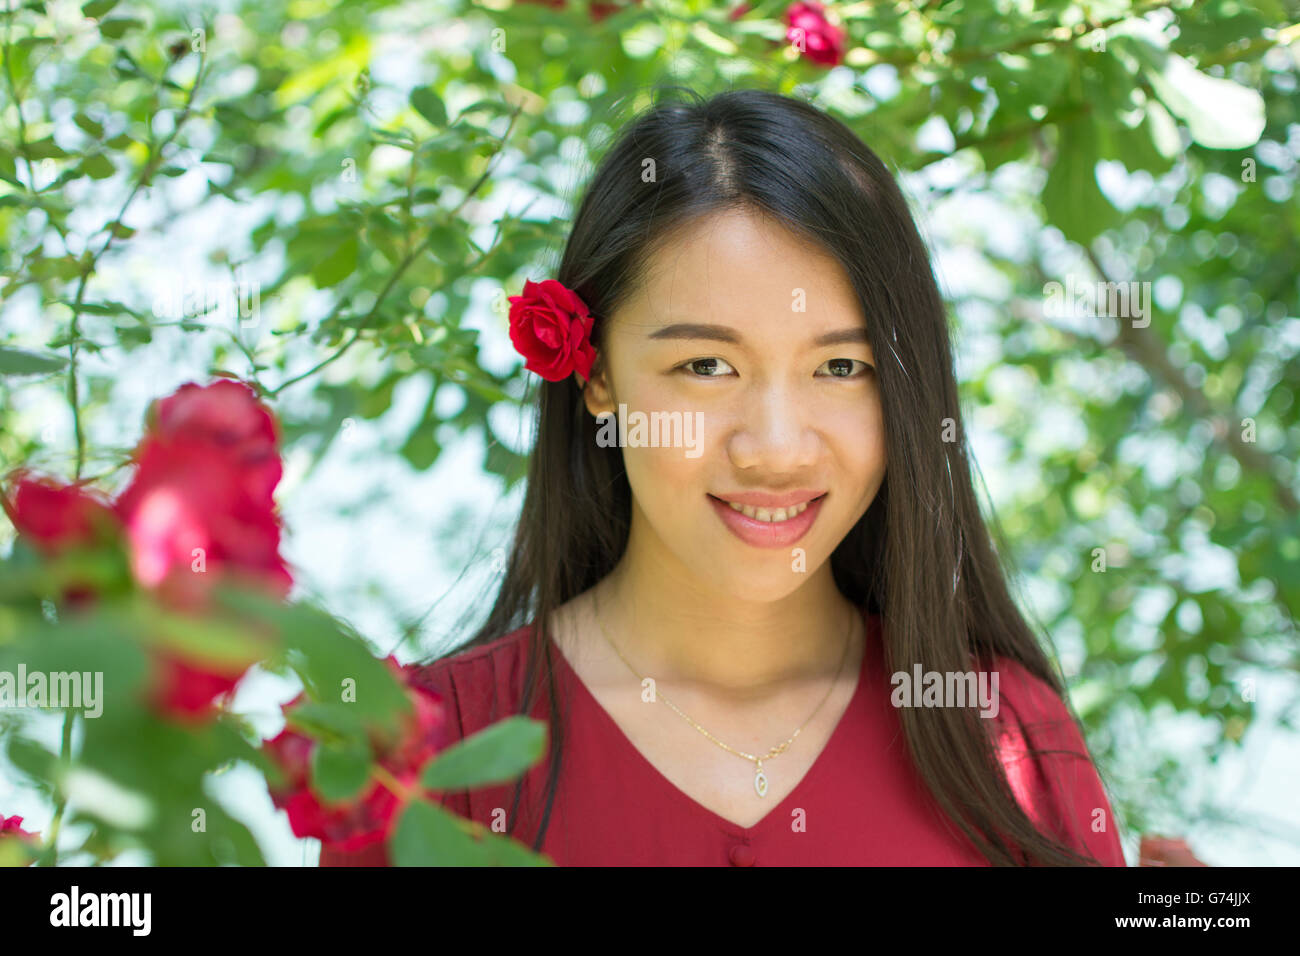 Woman in red dress with a red rose in her hair Stock Photo